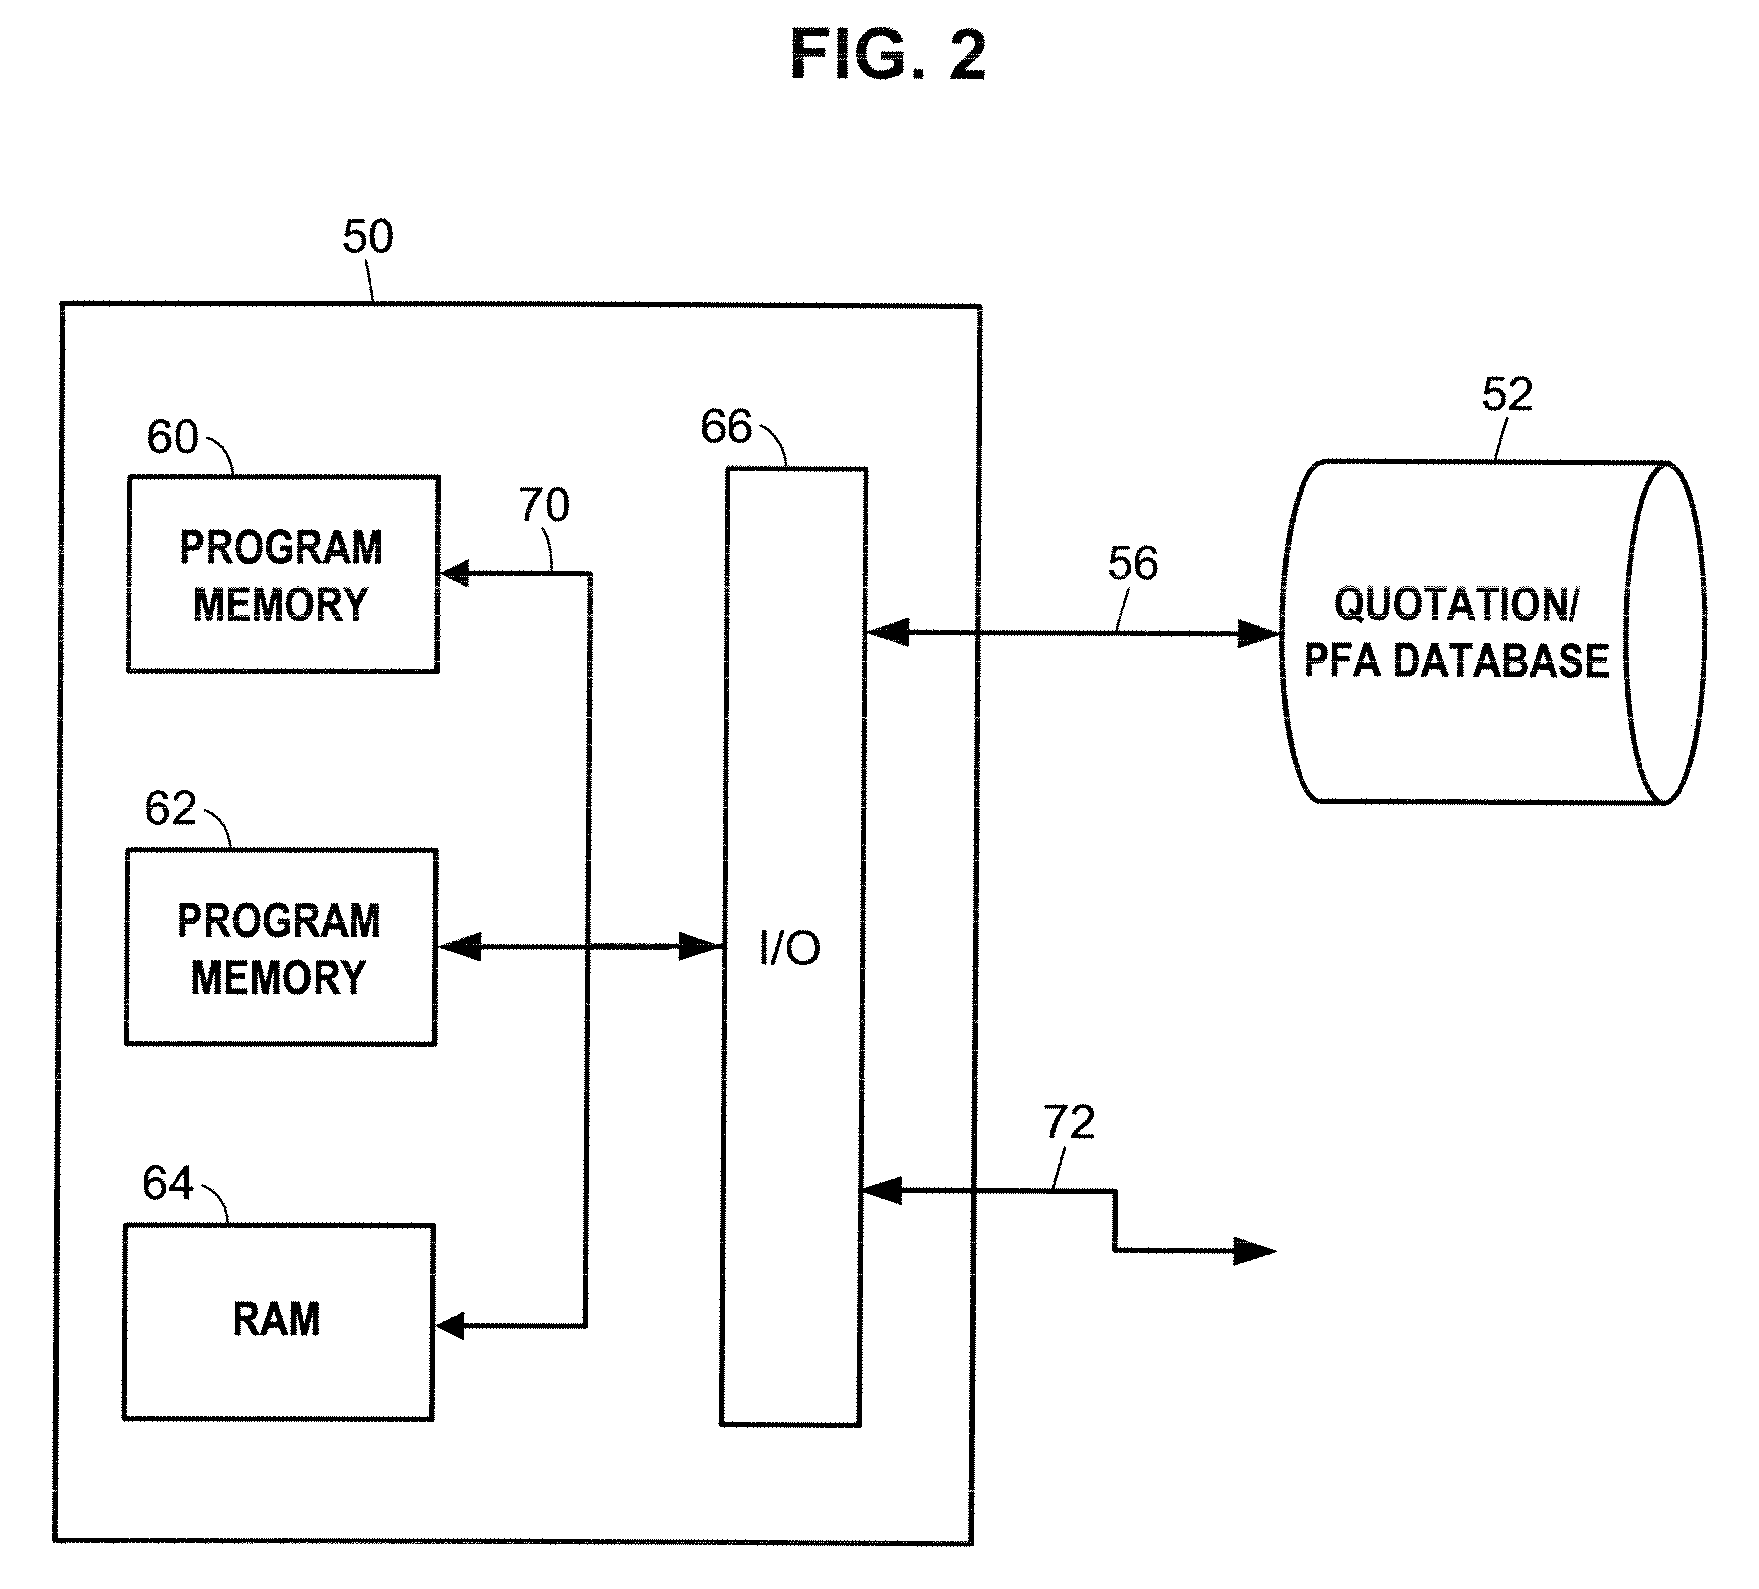 System and Method of Electronically Perfecting a Premium Finance Agreement